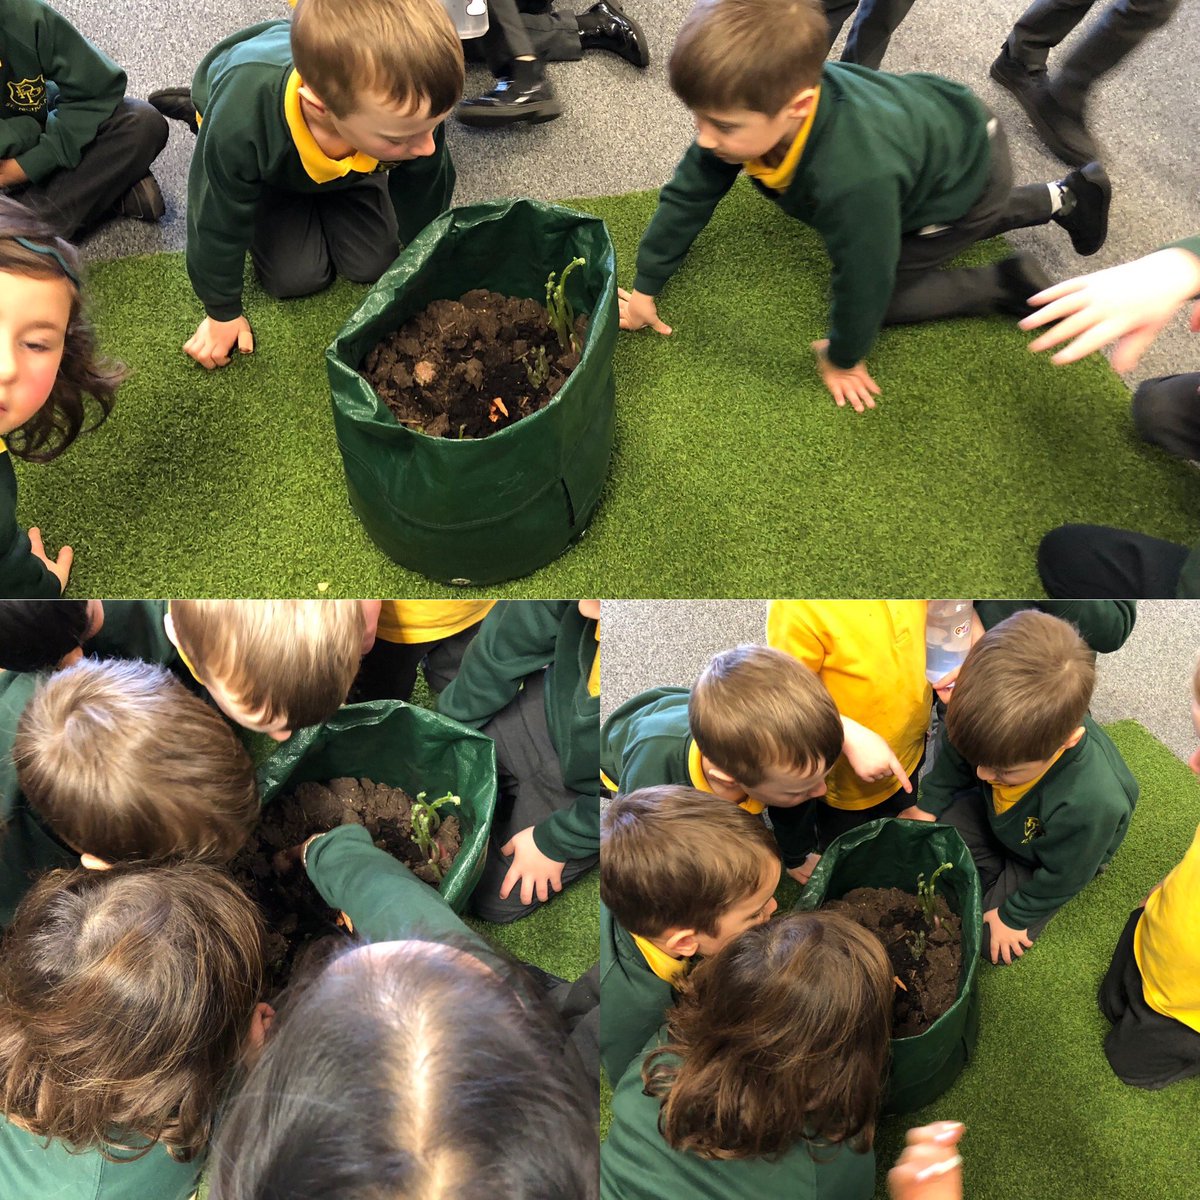 Before the holidays, P1 planted some potatoes, and it's good to see how they're growing. #laudatosistnics #ecostnics #p1stnics #believingandachievingstnics